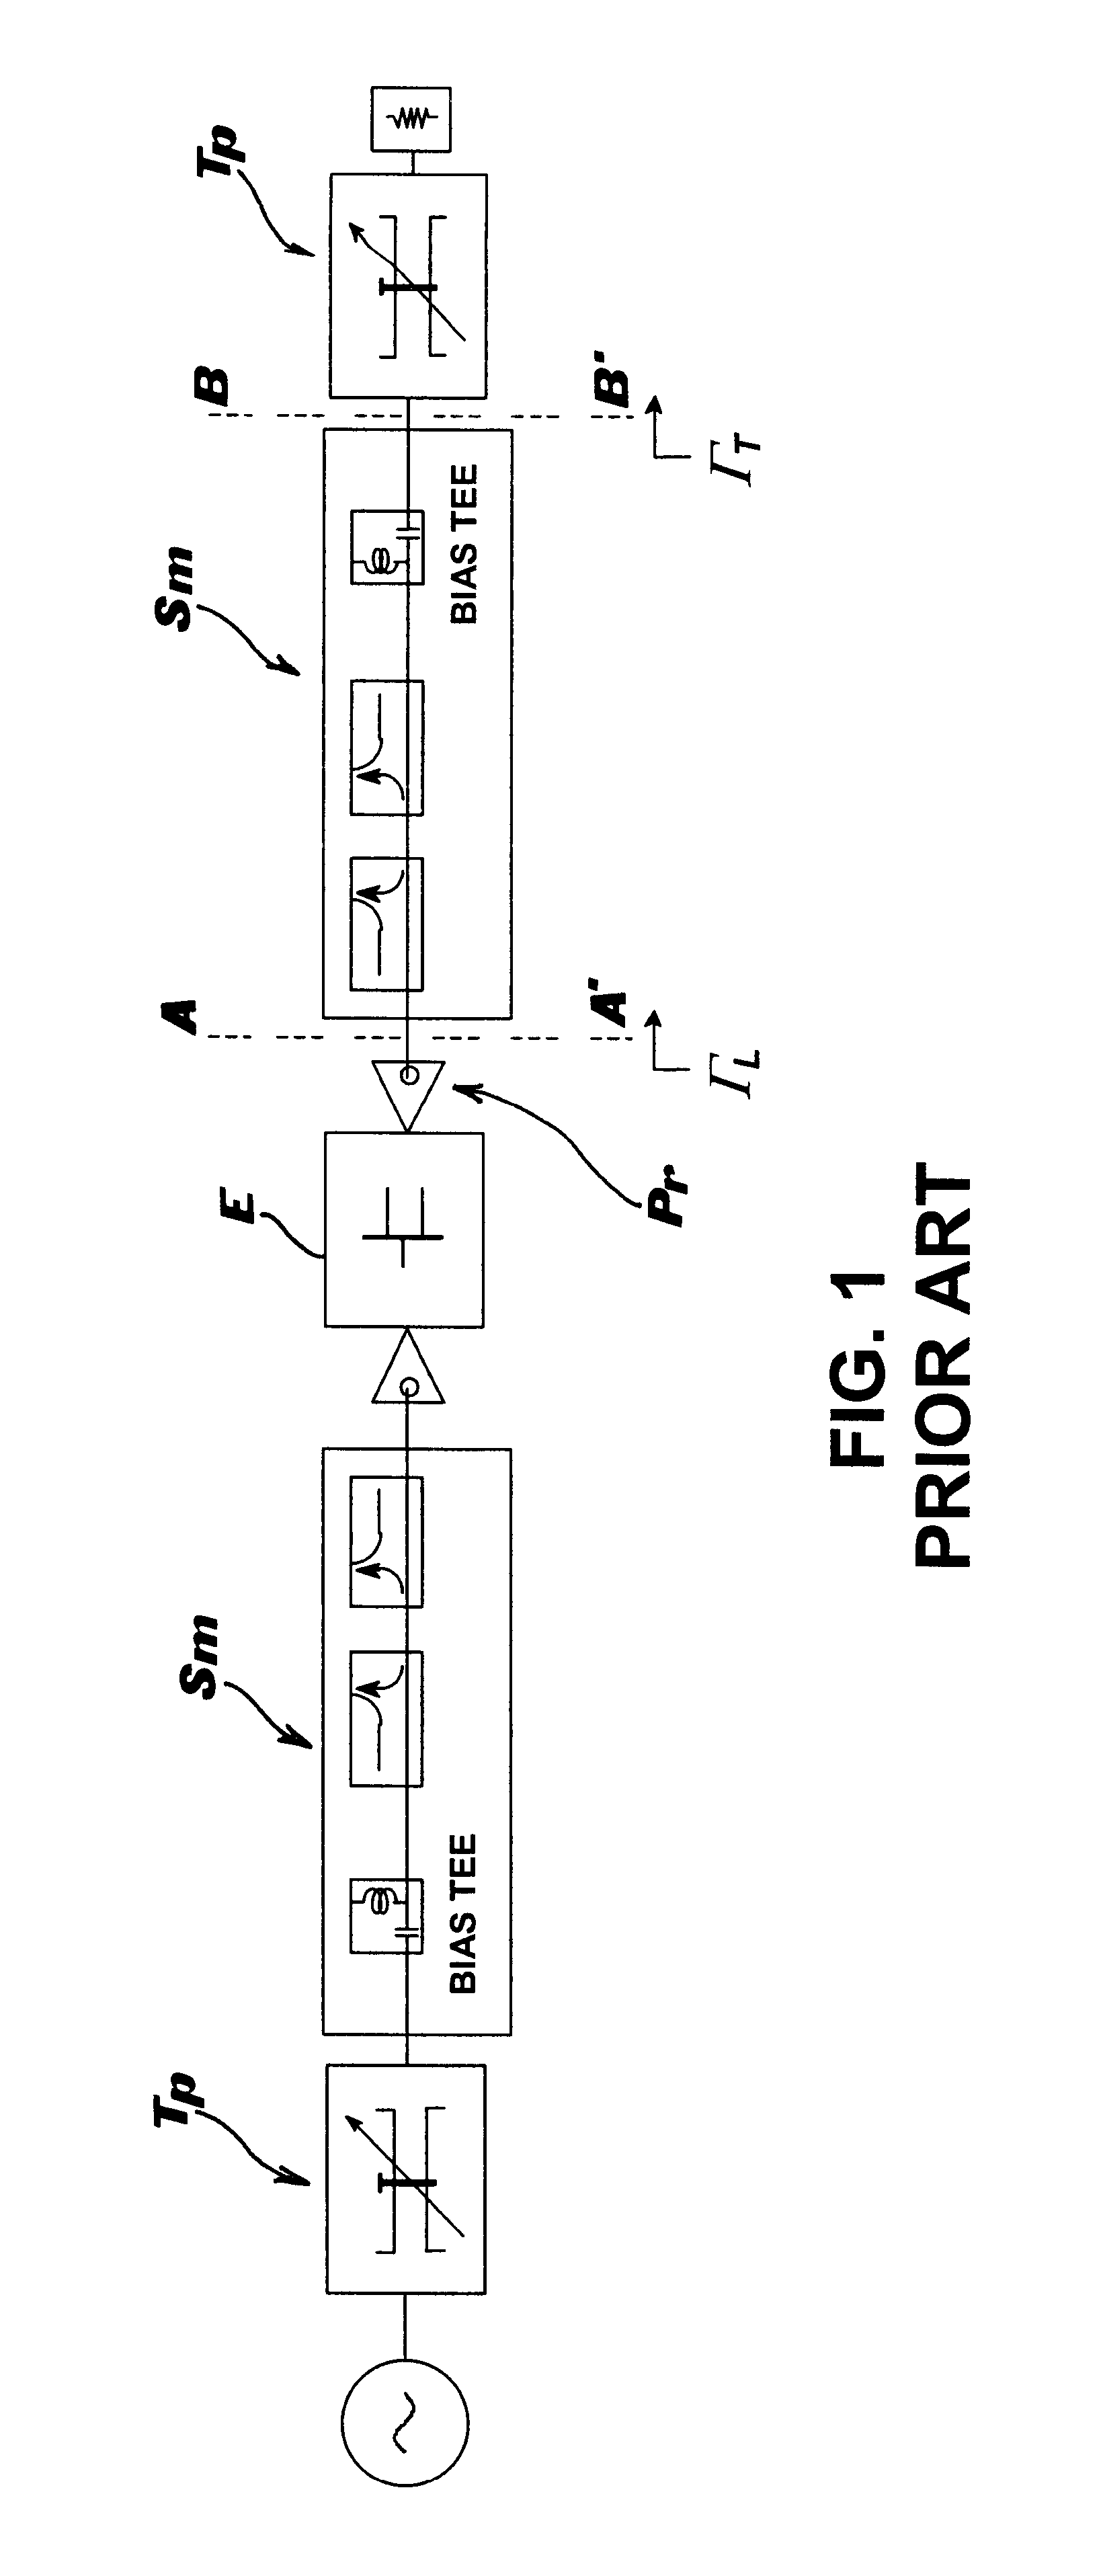 Active load or source impedance synthesis apparatus for measurement test set of microwave components and systems